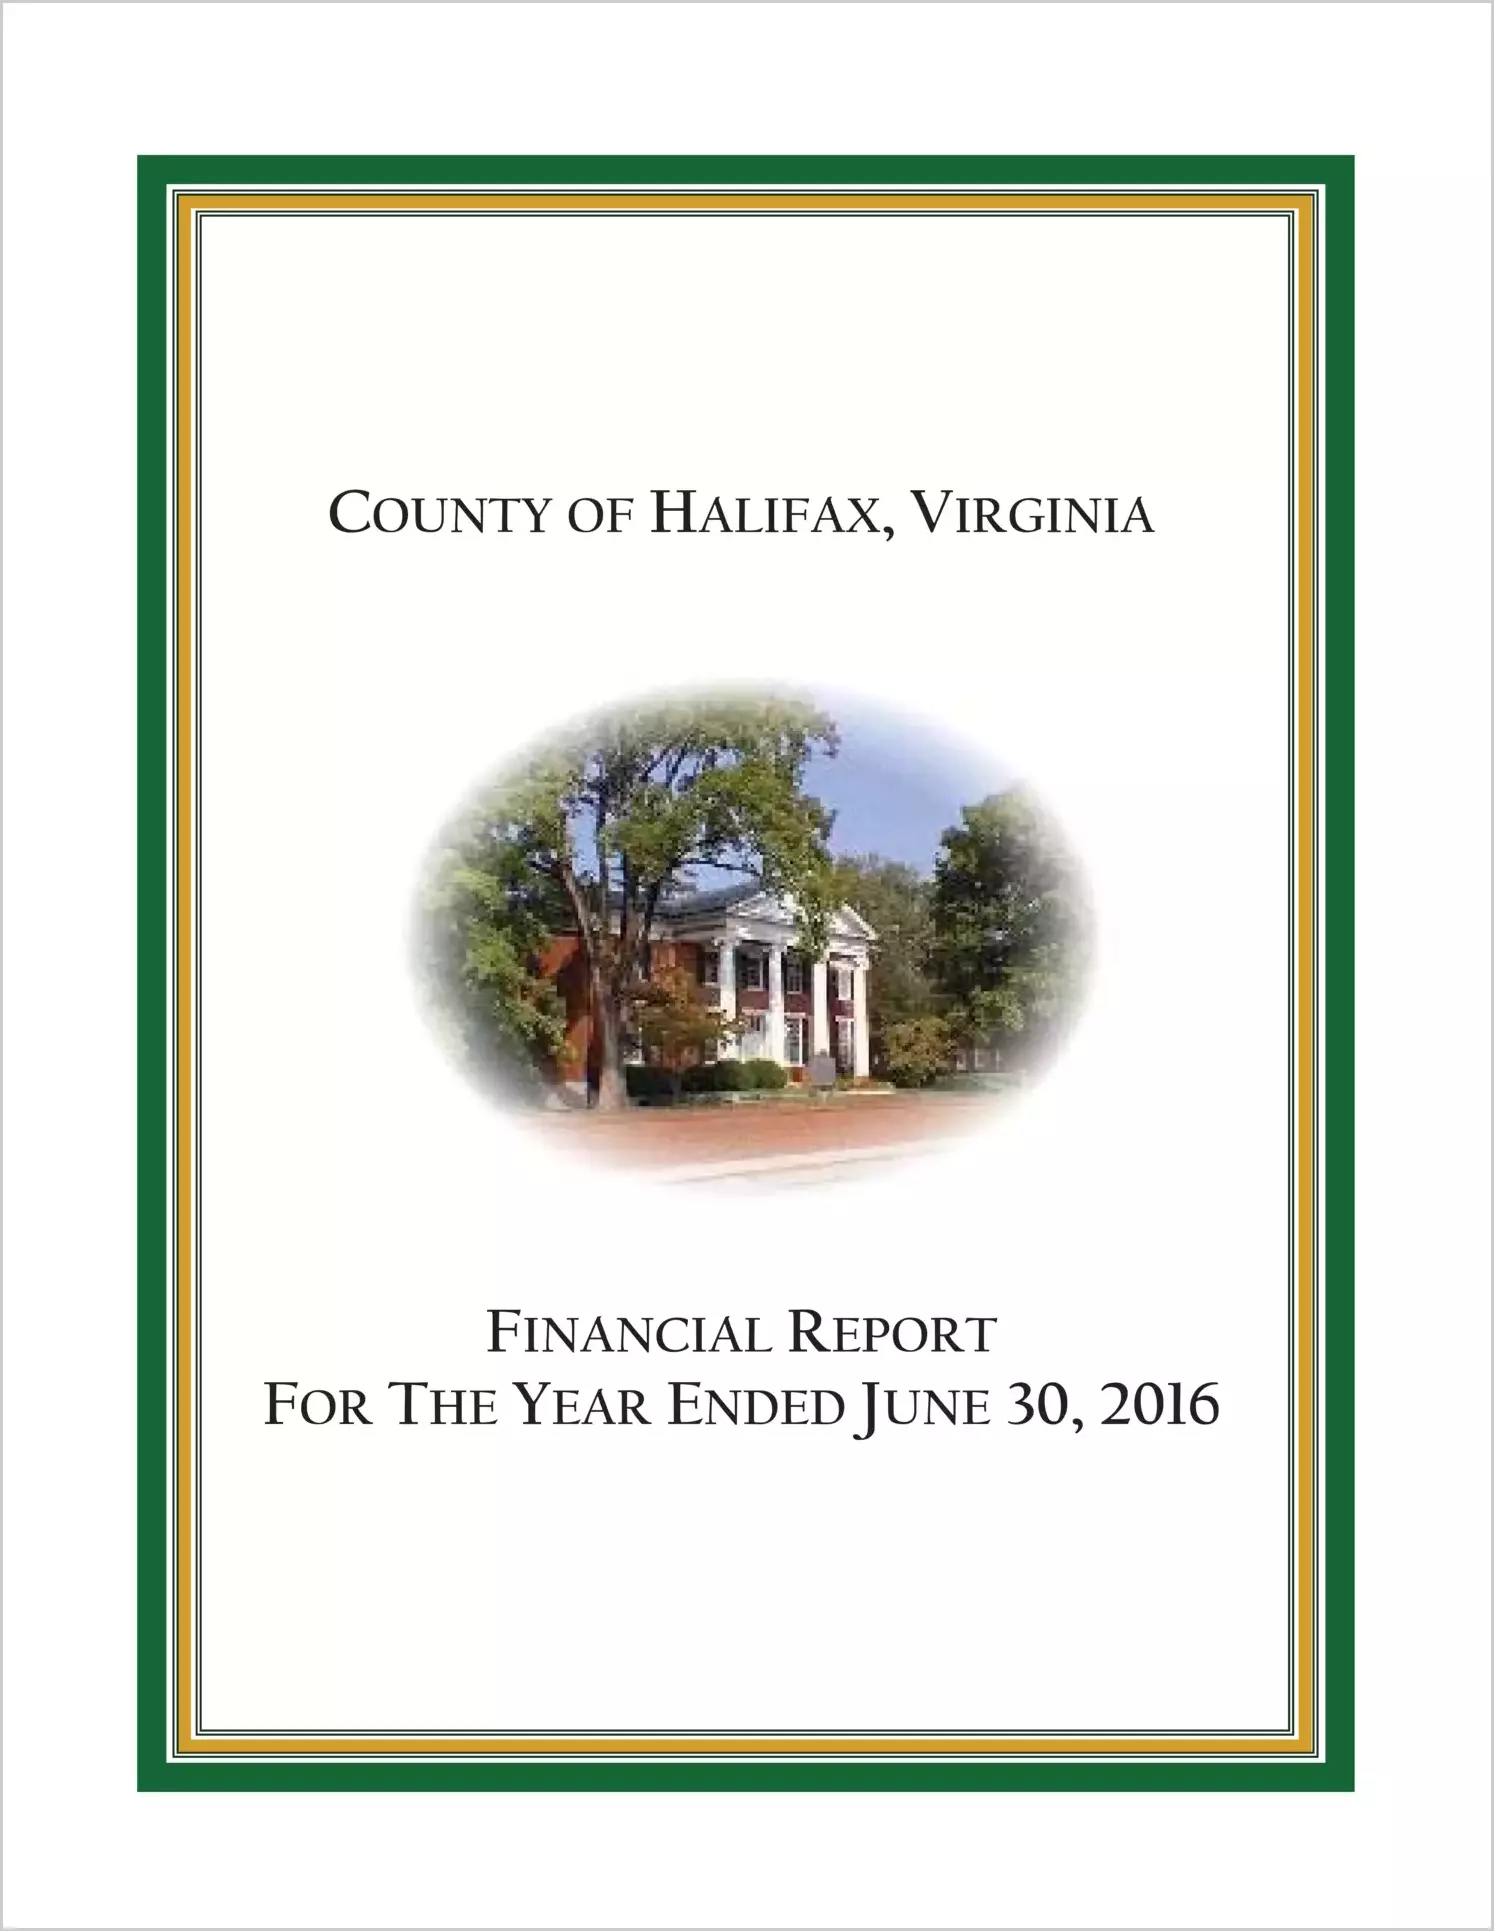 2016 Annual Financial Report for County of Halifax